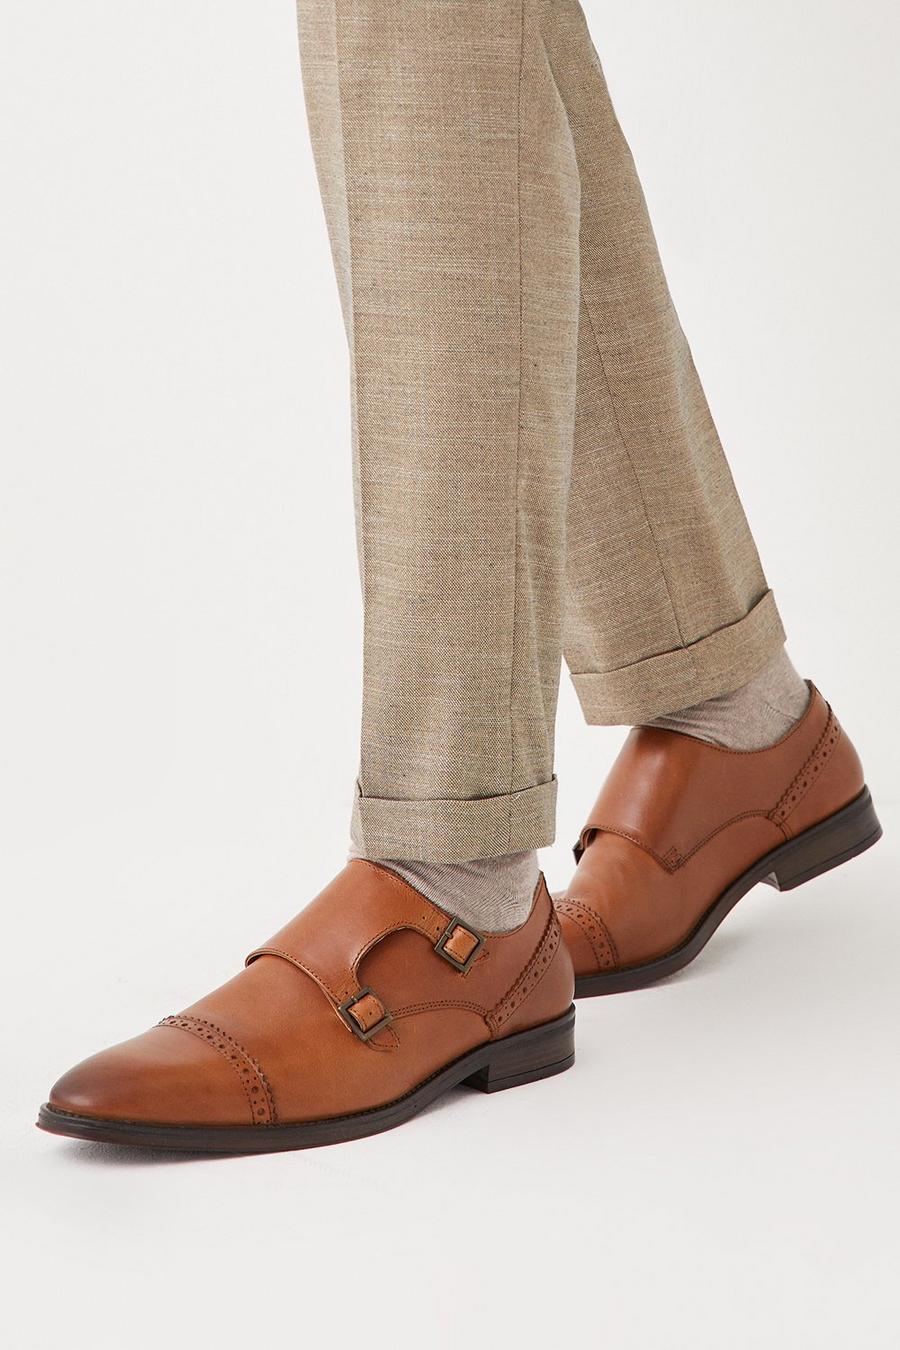 Tan Leather Smart Brogue Monk Shoes